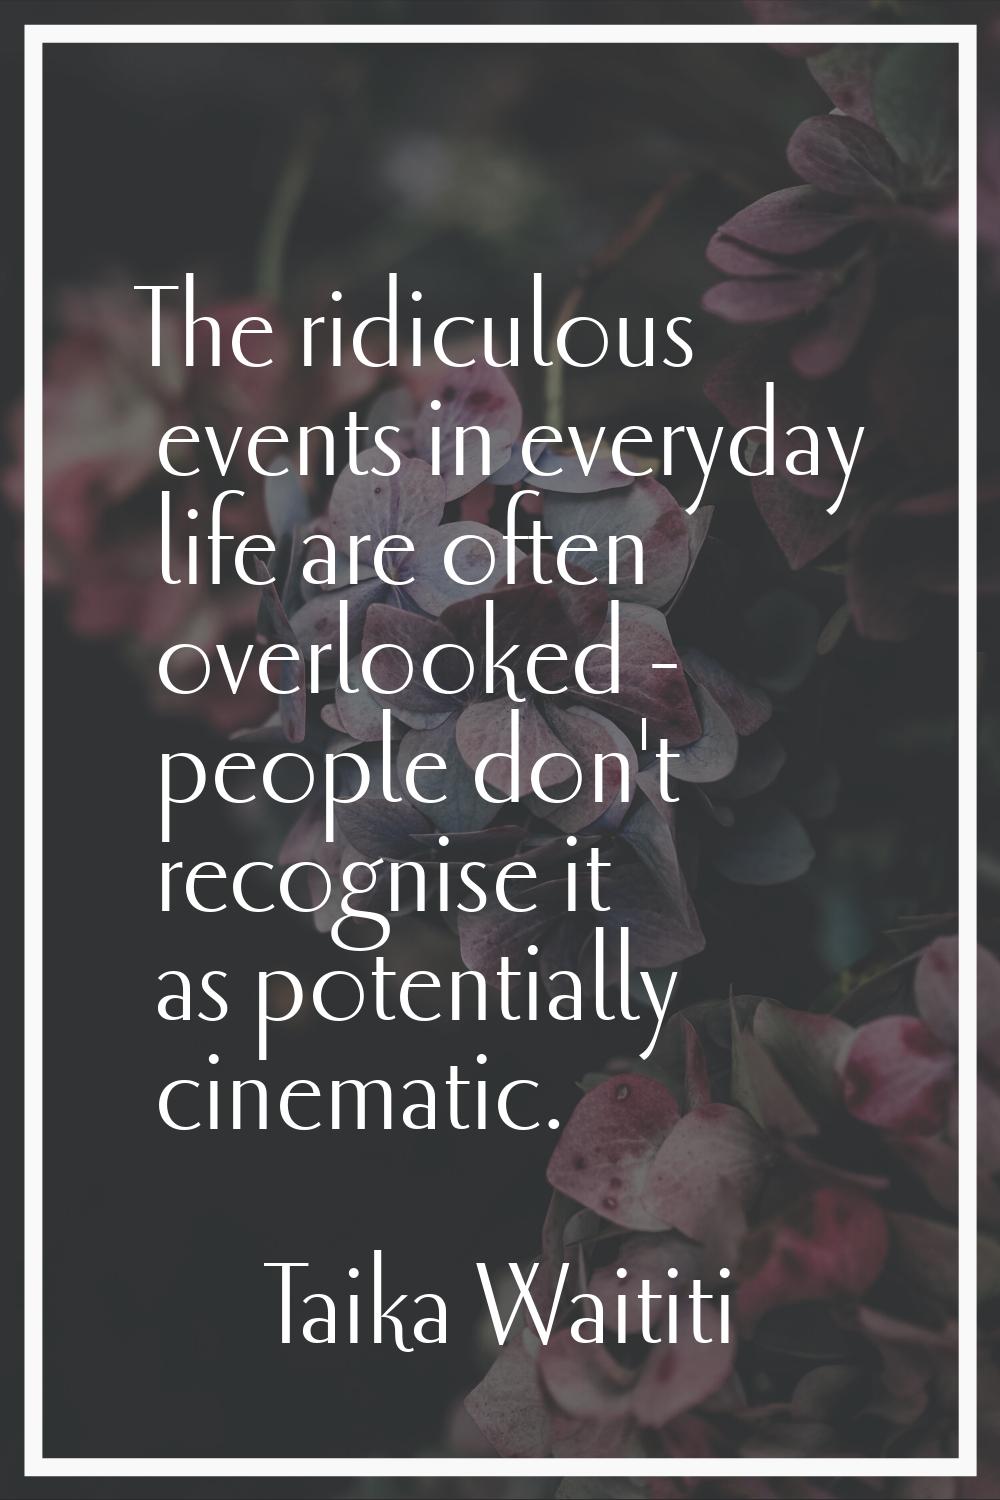 The ridiculous events in everyday life are often overlooked - people don't recognise it as potentia